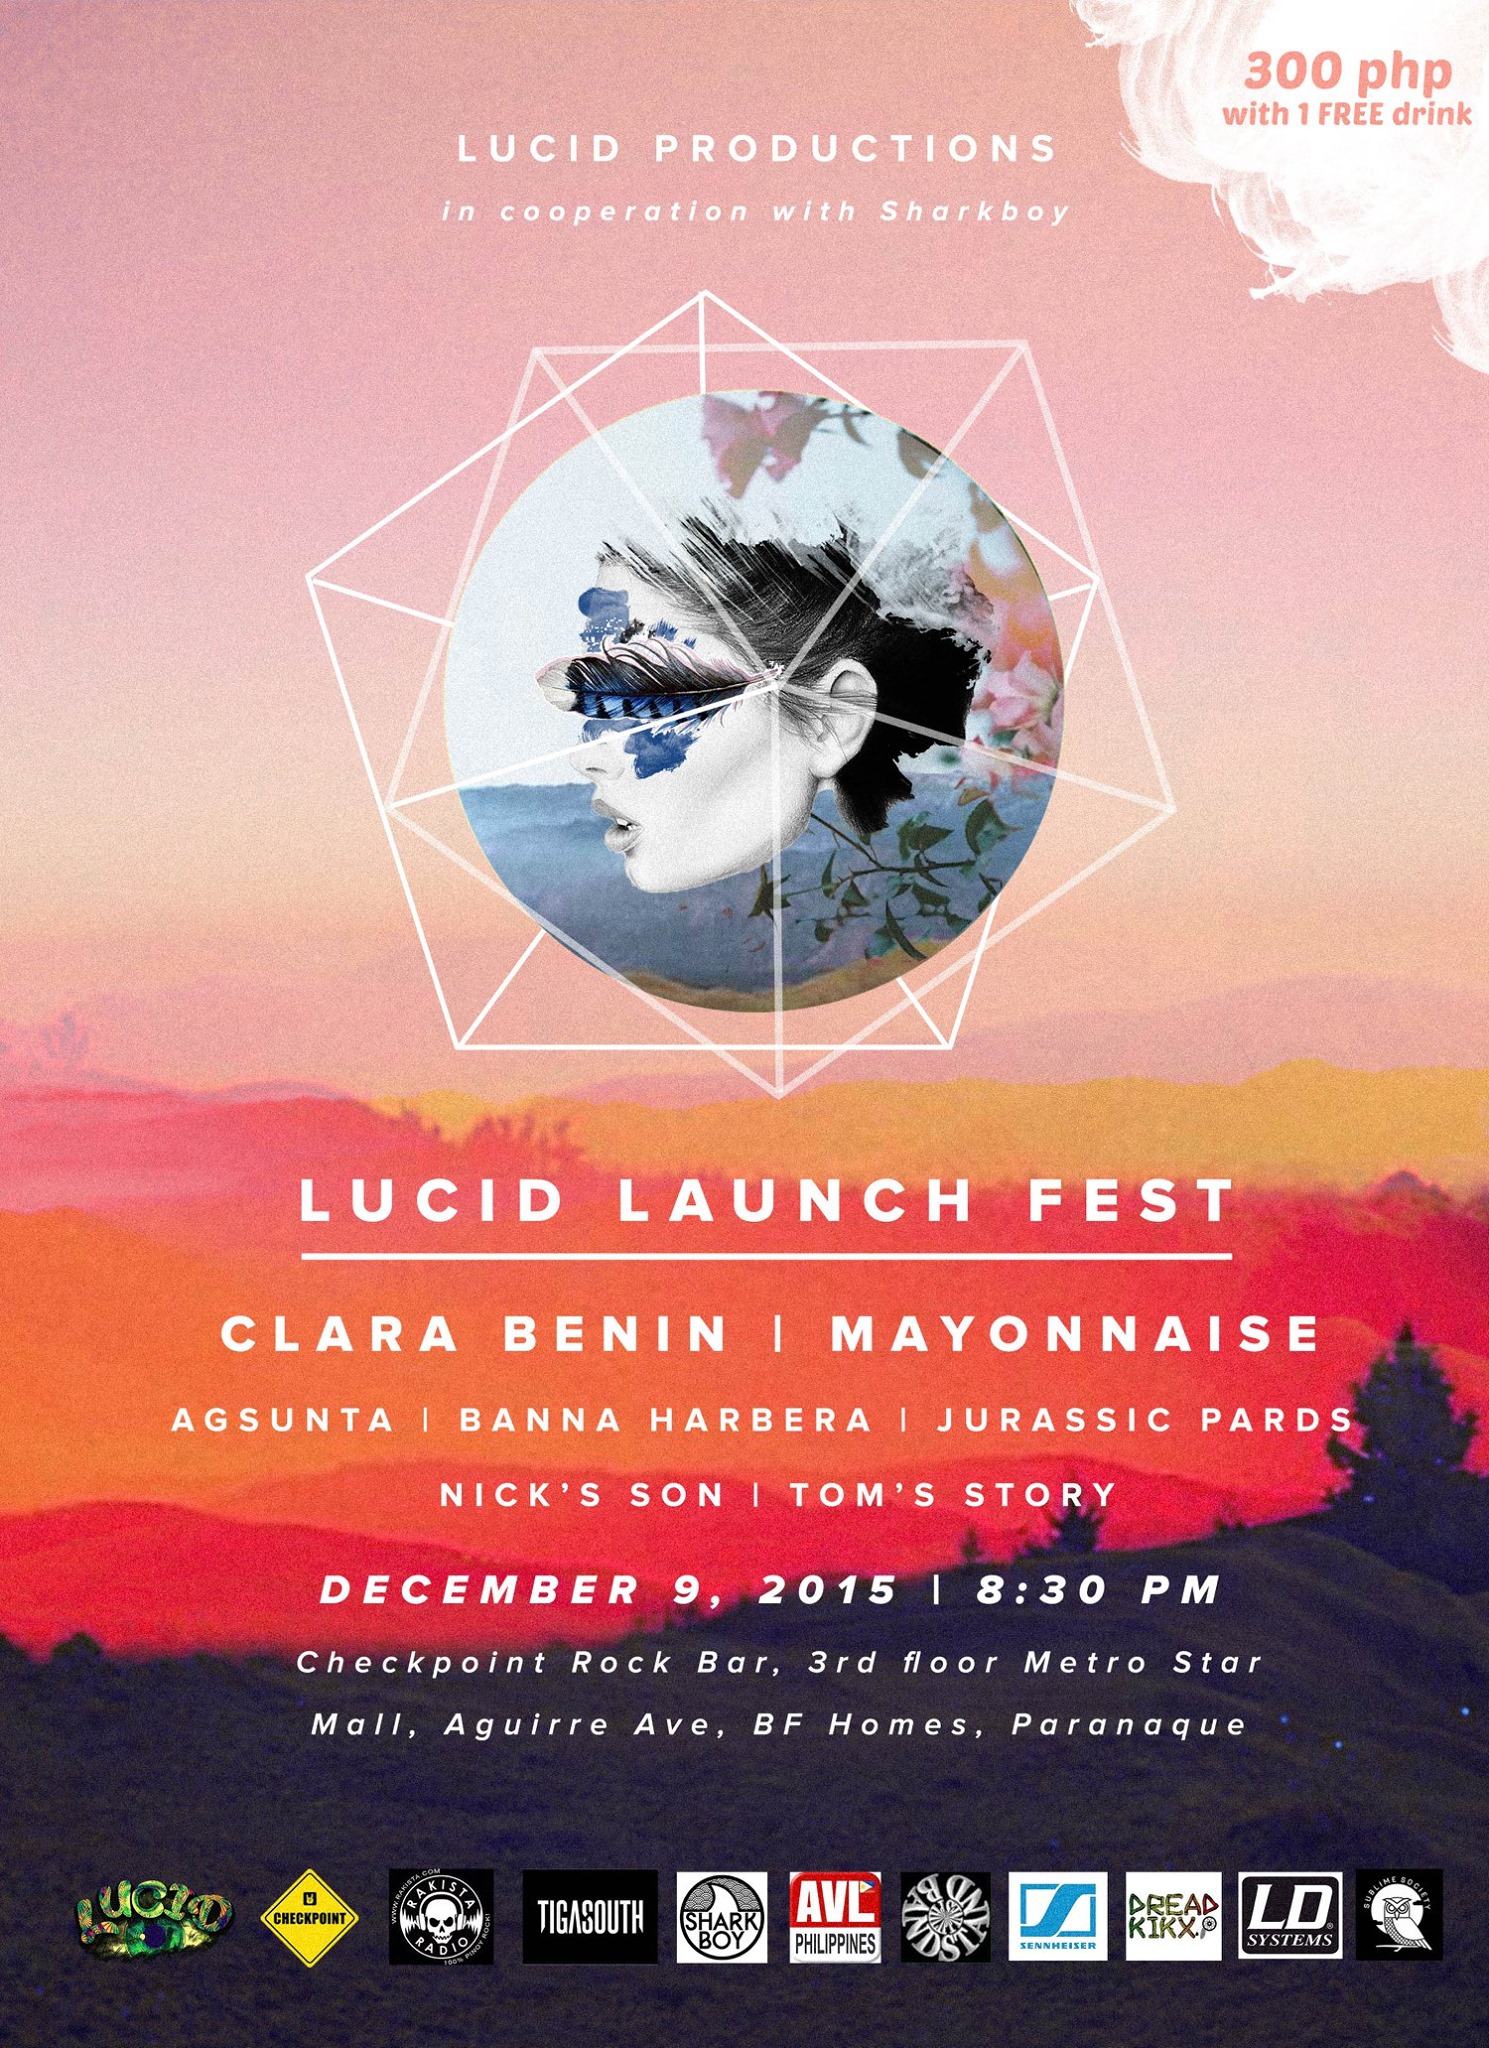 Lucid Launch Fest clock Wednesday, December 9 at 8:30pm Next Week · 91°F / 75°F Clear pin Show Map Checkpoint Rock Bar MetroStar Mall, Aguirre Avenue, BF Homes, Sucat, 1700 Parañaque Checkpoint Rock Bar December 9 | 8:30pm Clara Benin Mayonnaise Agsunta Banna Harbera Jurassic Pards Nick's Son Tom's Story ----- Please click this link for Ticket Form: http://goo.gl/forms/IxJhDvq2ea